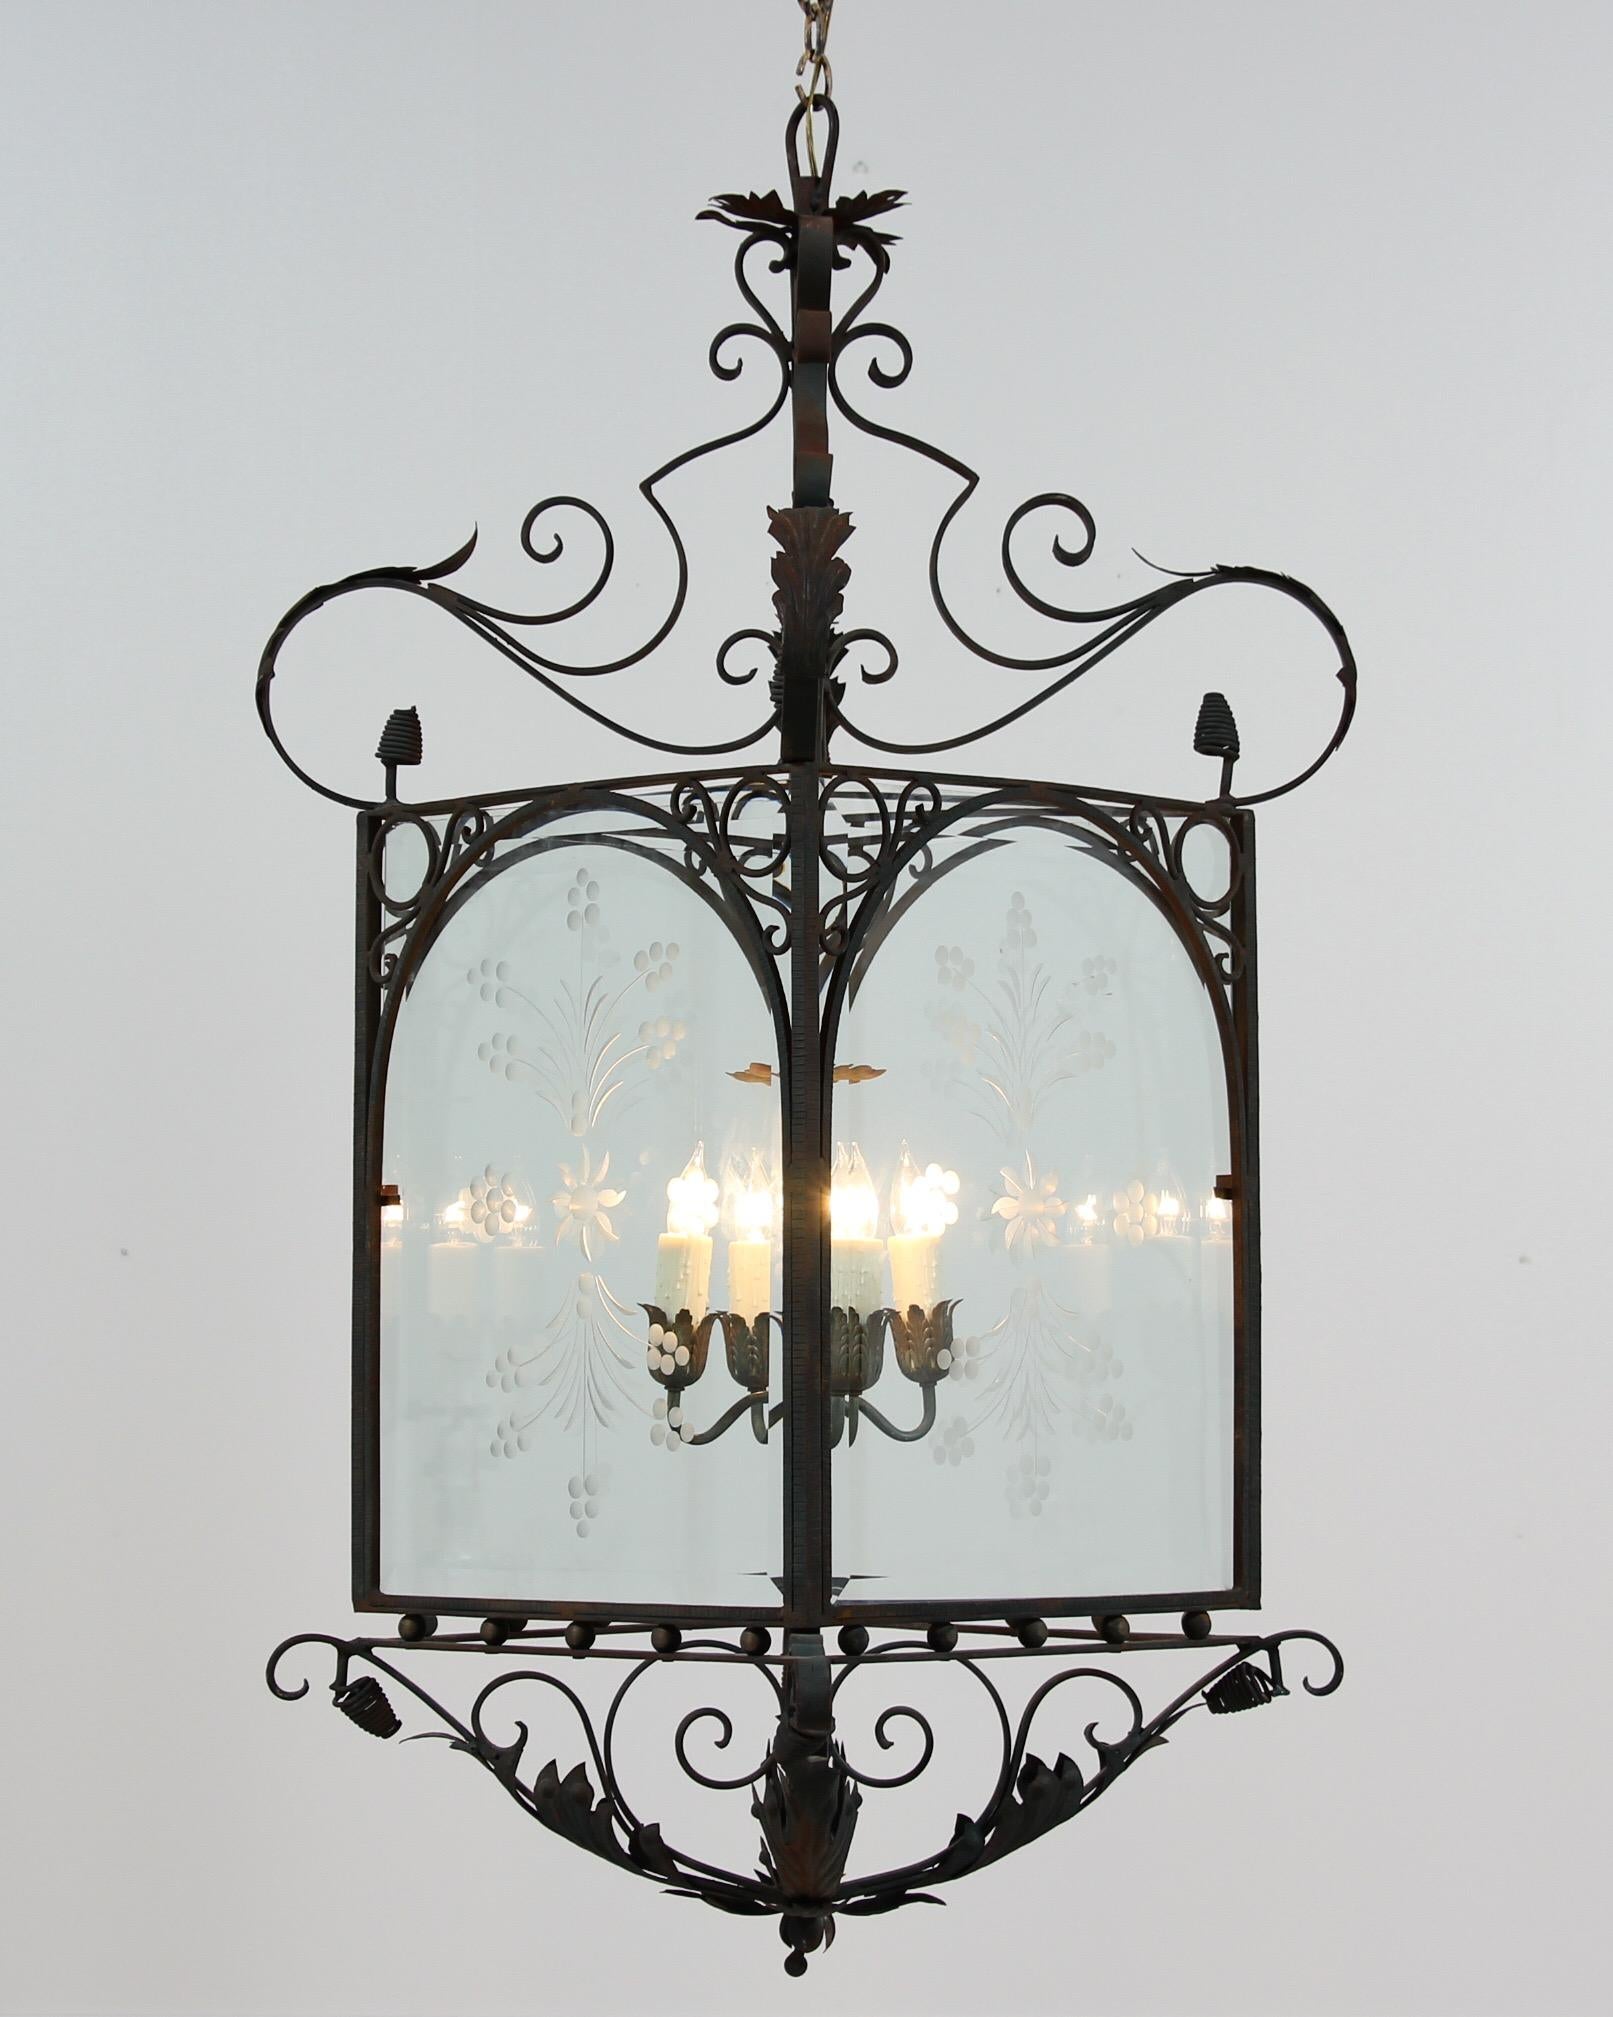 Monumental, 1930s pair of Spanish wrought iron lantern chandeliers in the Baroque style. These impressive lanterns feature painted iron frames with beveled glass panels. The dark green paint on the iron has naturally distressed and shows a beautiful